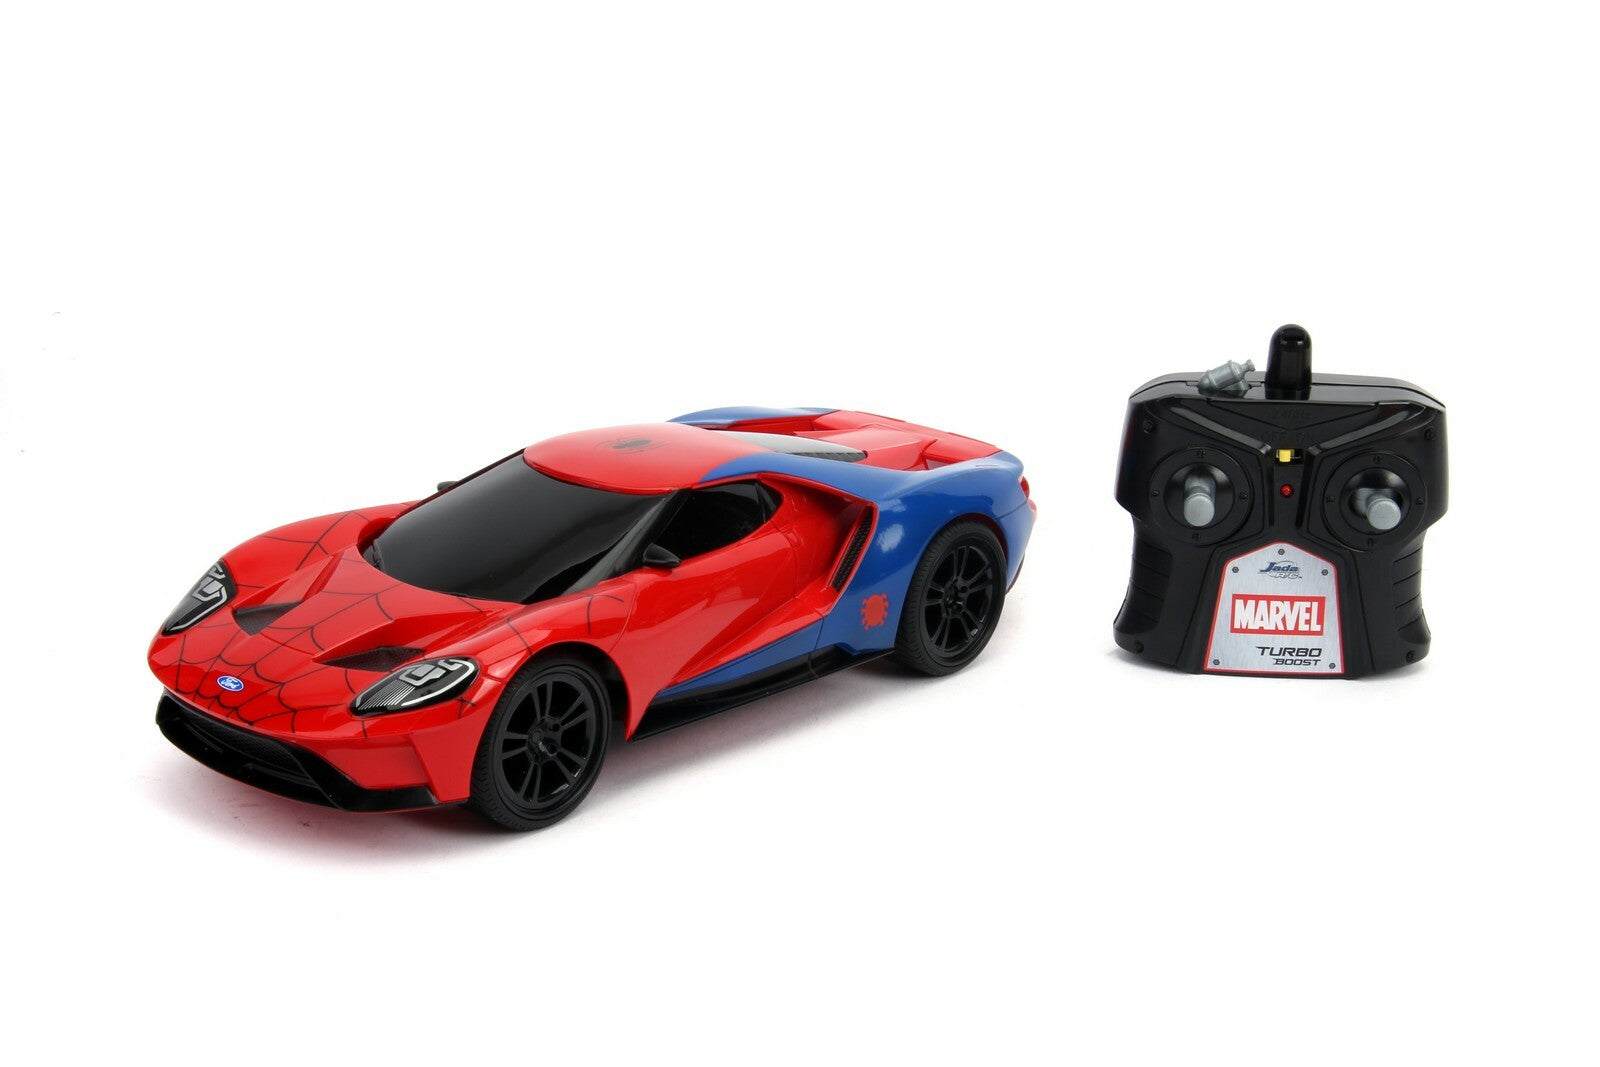  Marvel: Spider-Man - 2017 Ford GT 1:16 Scale Remote Controlled Vehicle  4006333070389